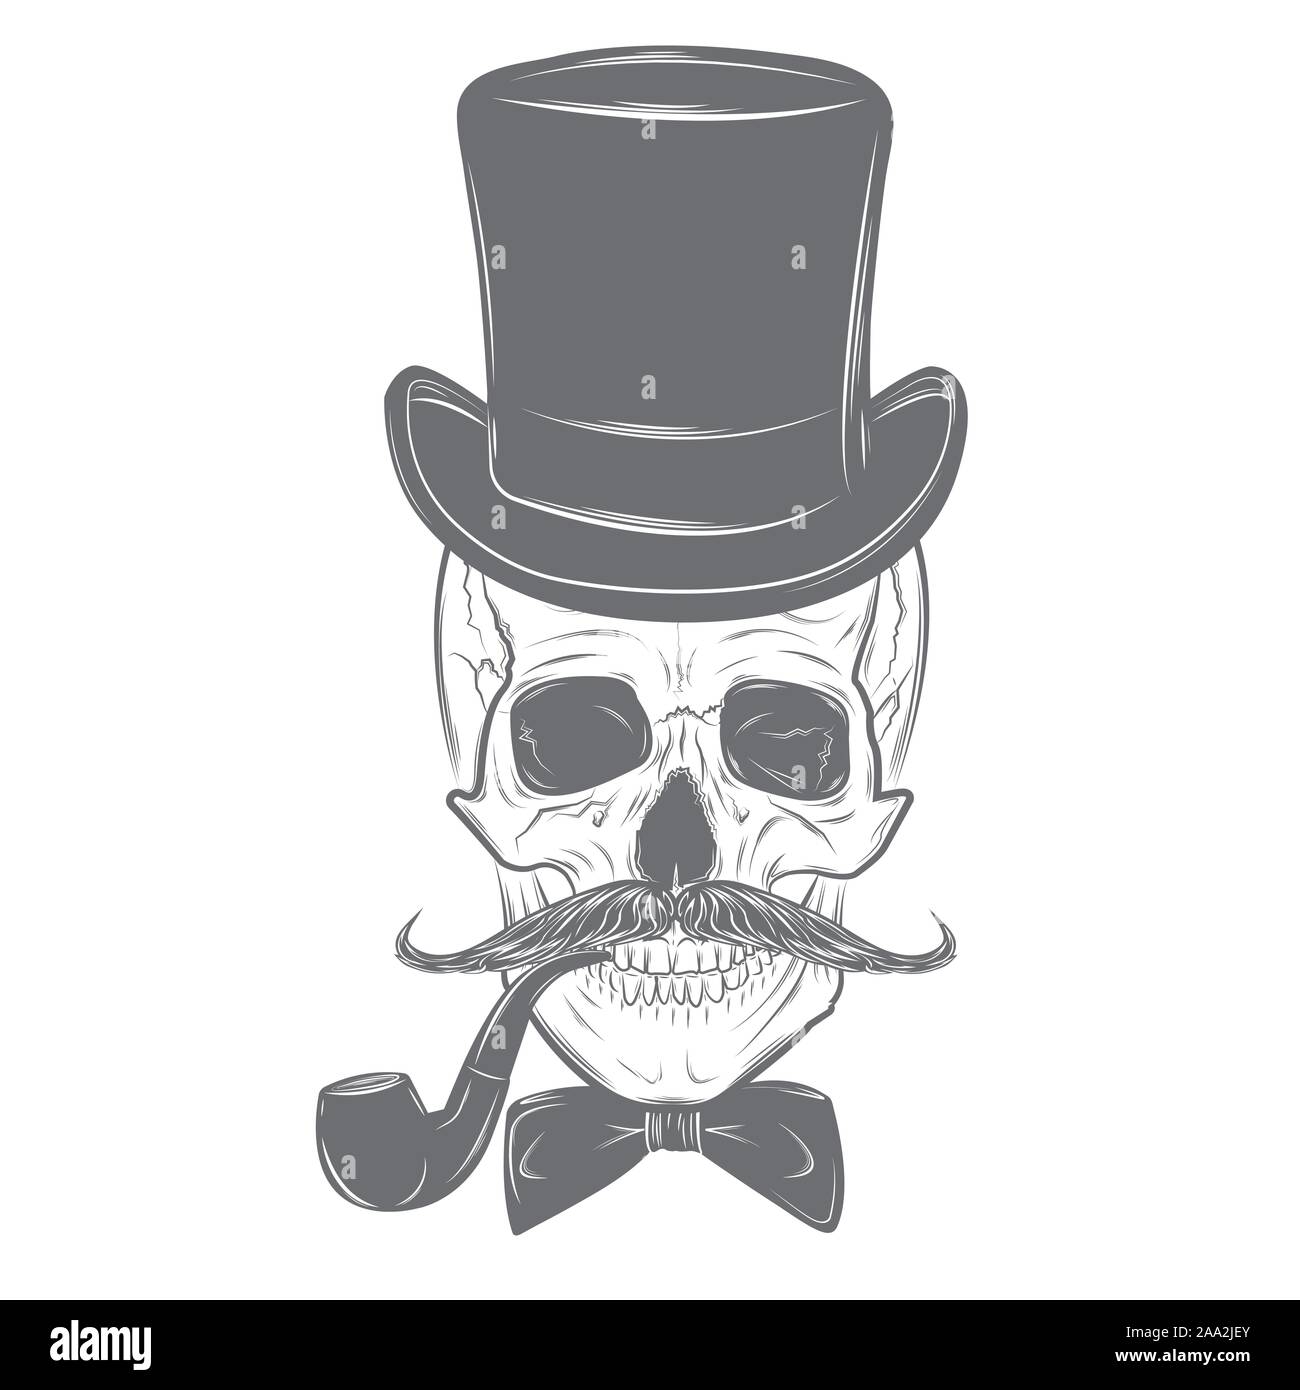 Gentleman skull with mustache, bow tie, top hat and smoking pipe. Skull print, skull illustration isolated on white background. Vector mode Stock Vector